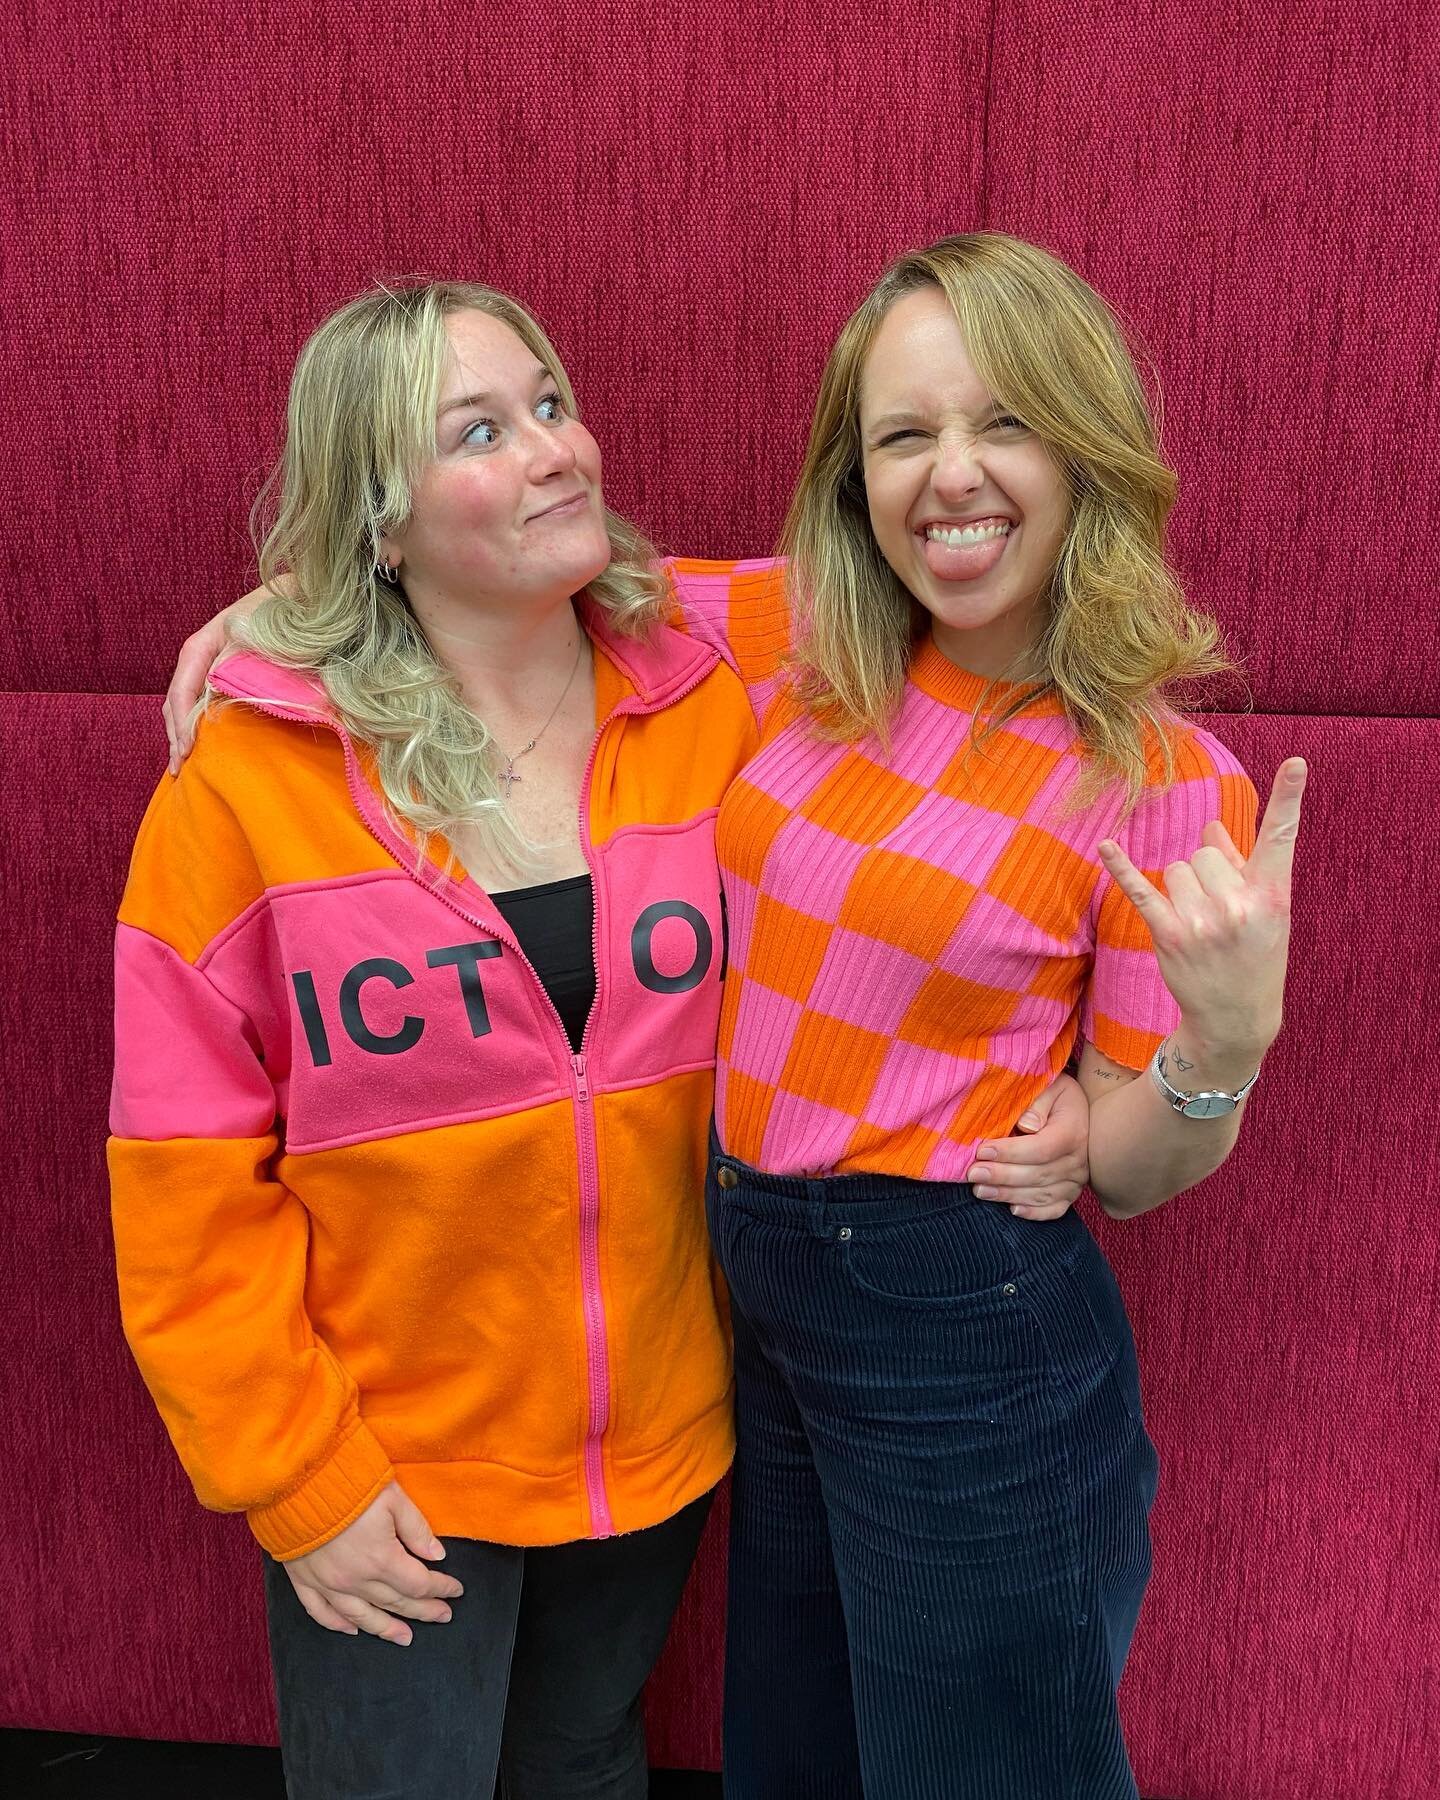 When you rock up to work twinning. Perhaps calls for a new EMA uniform - pink and orange 😂🙈. Merch dropping 2023

#eliettesmusicacademy #twinning